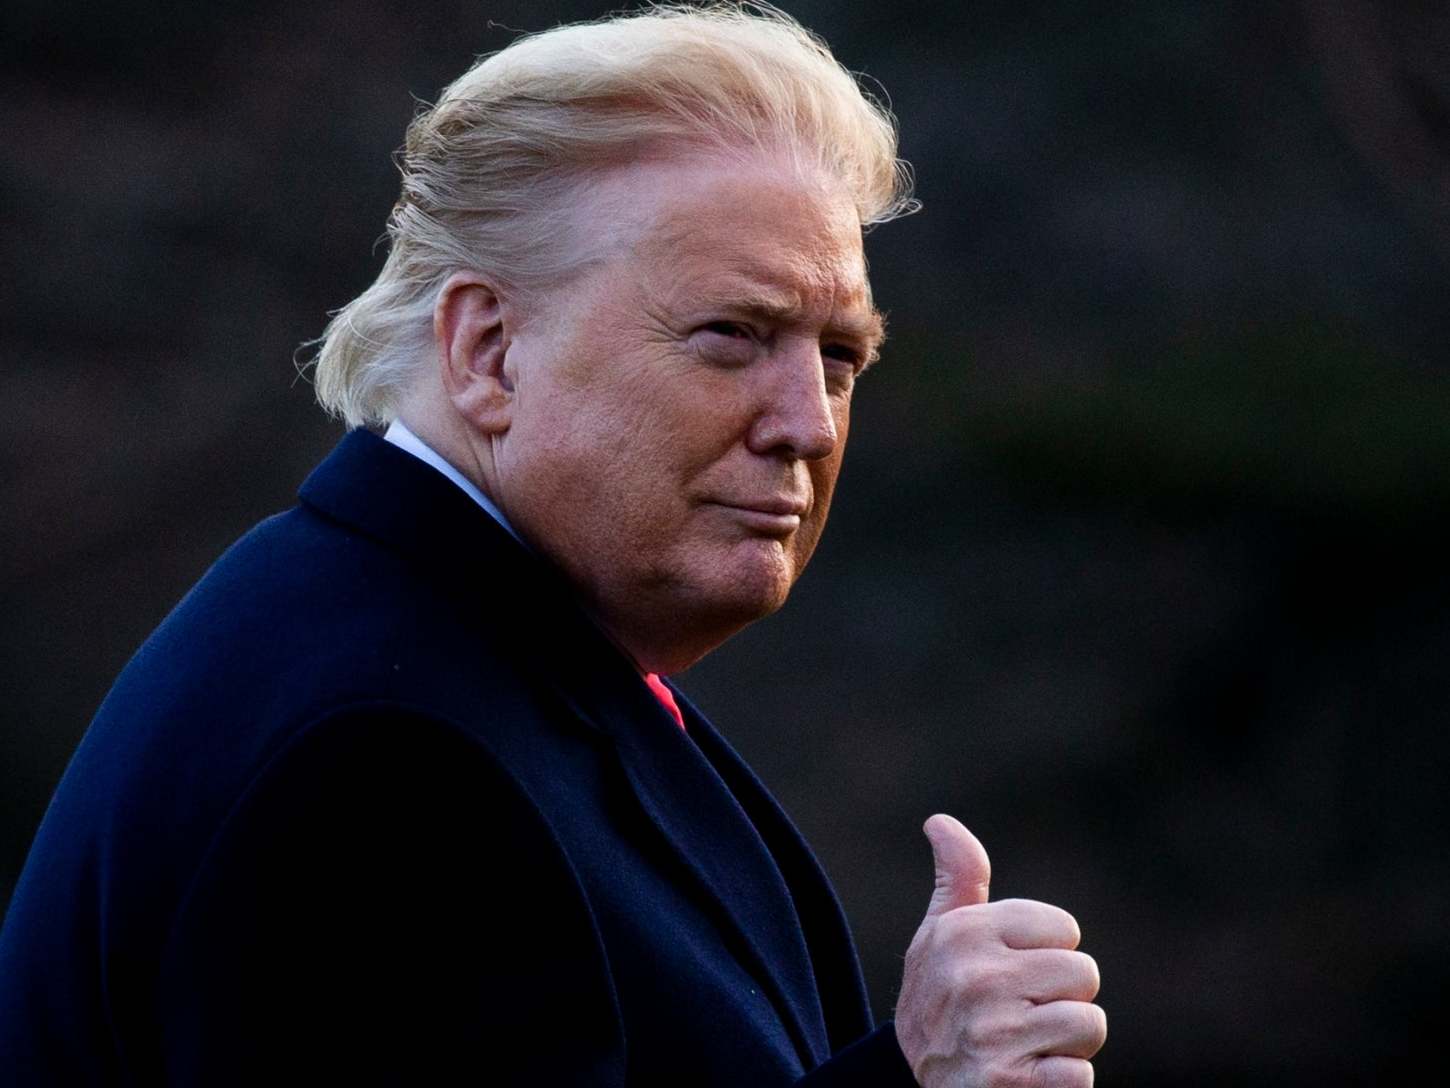 Donald Trump on the the White House South Lawn on 7 February 2020